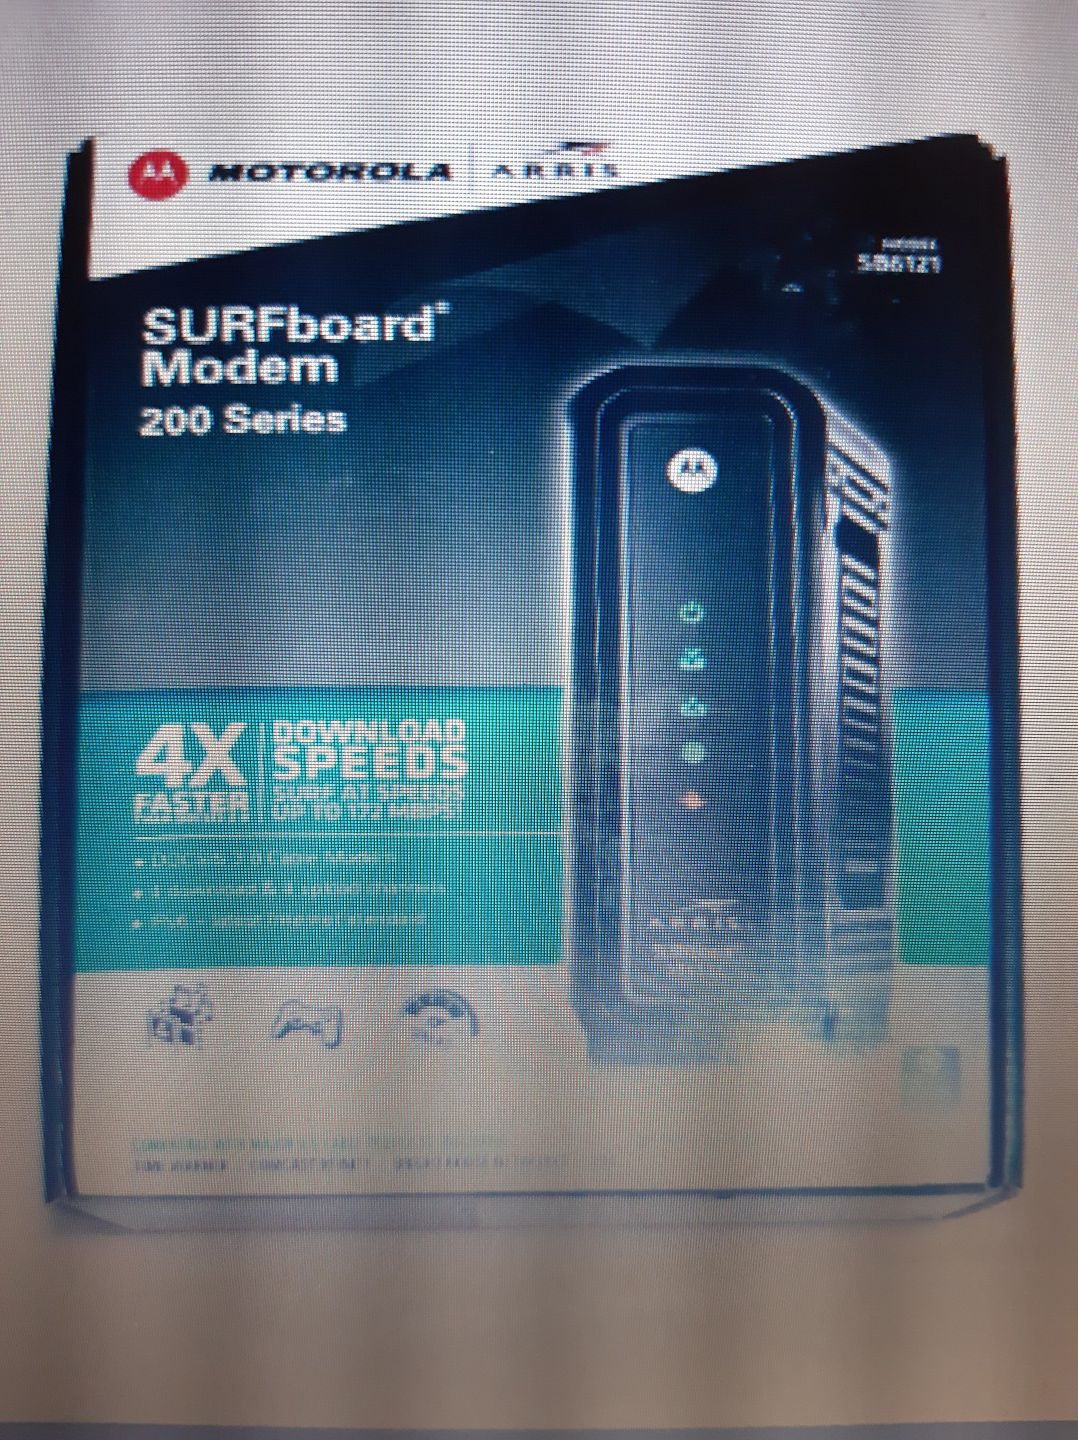 Branded Motorola arris modem and router